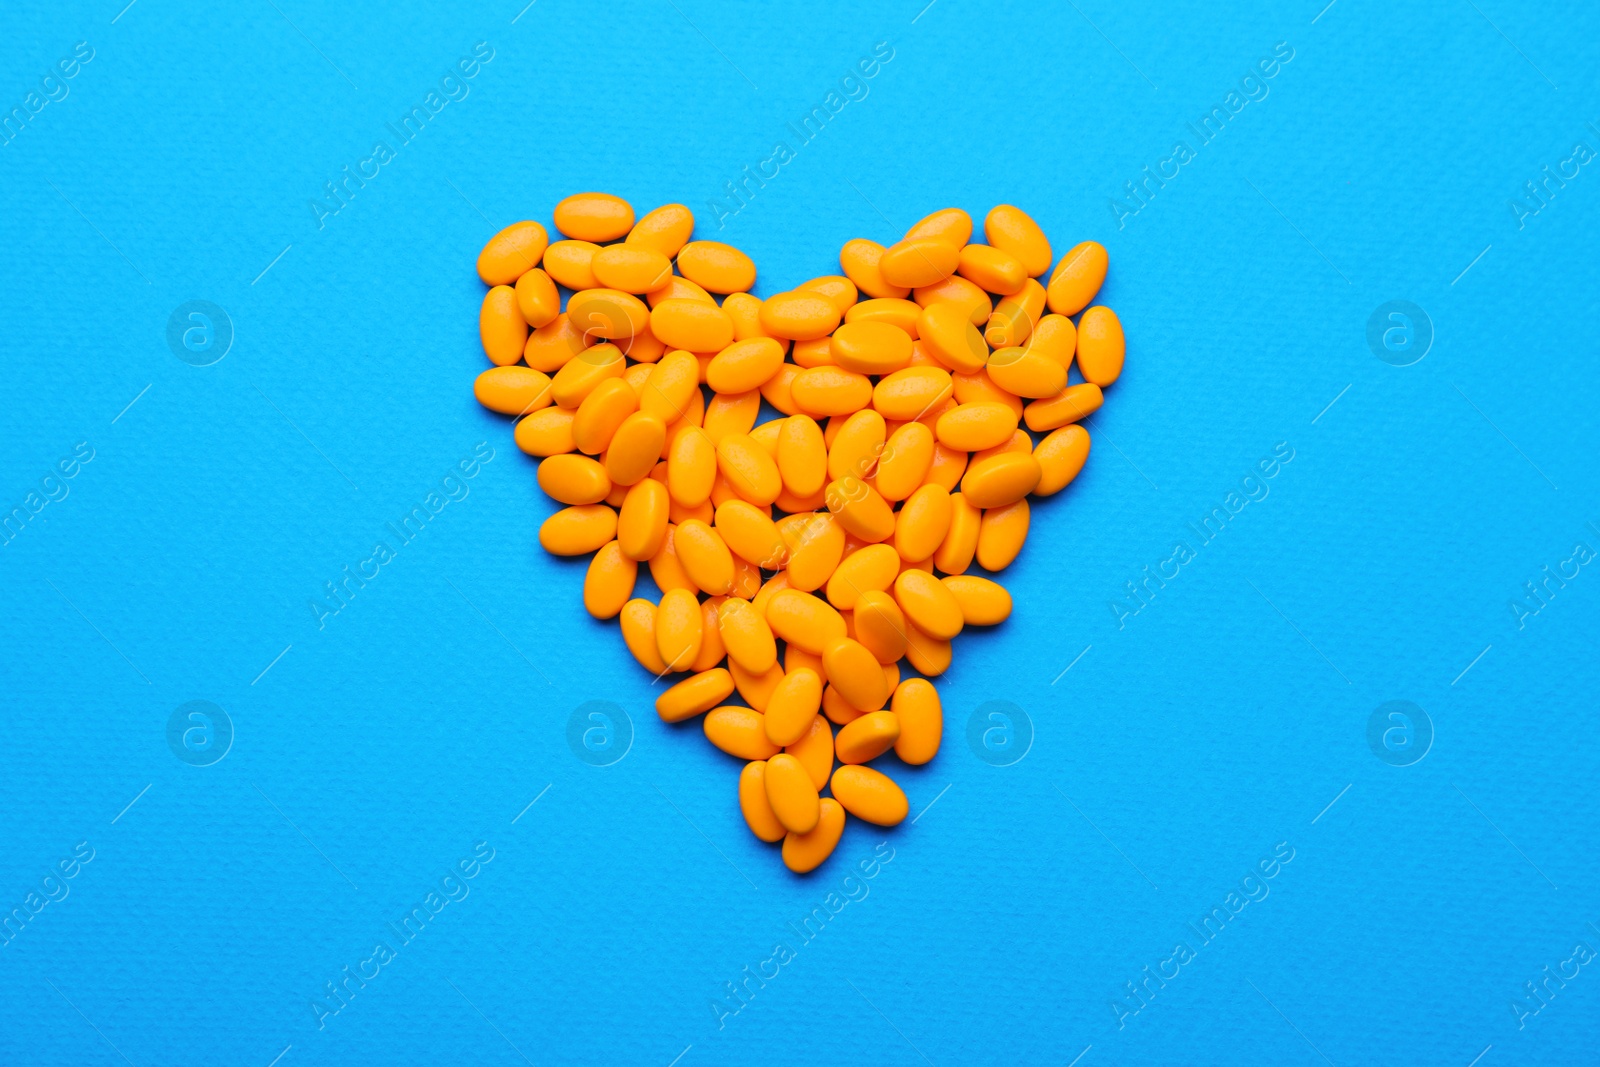 Photo of Heart made of orange dragee candies on blue background, flat lay